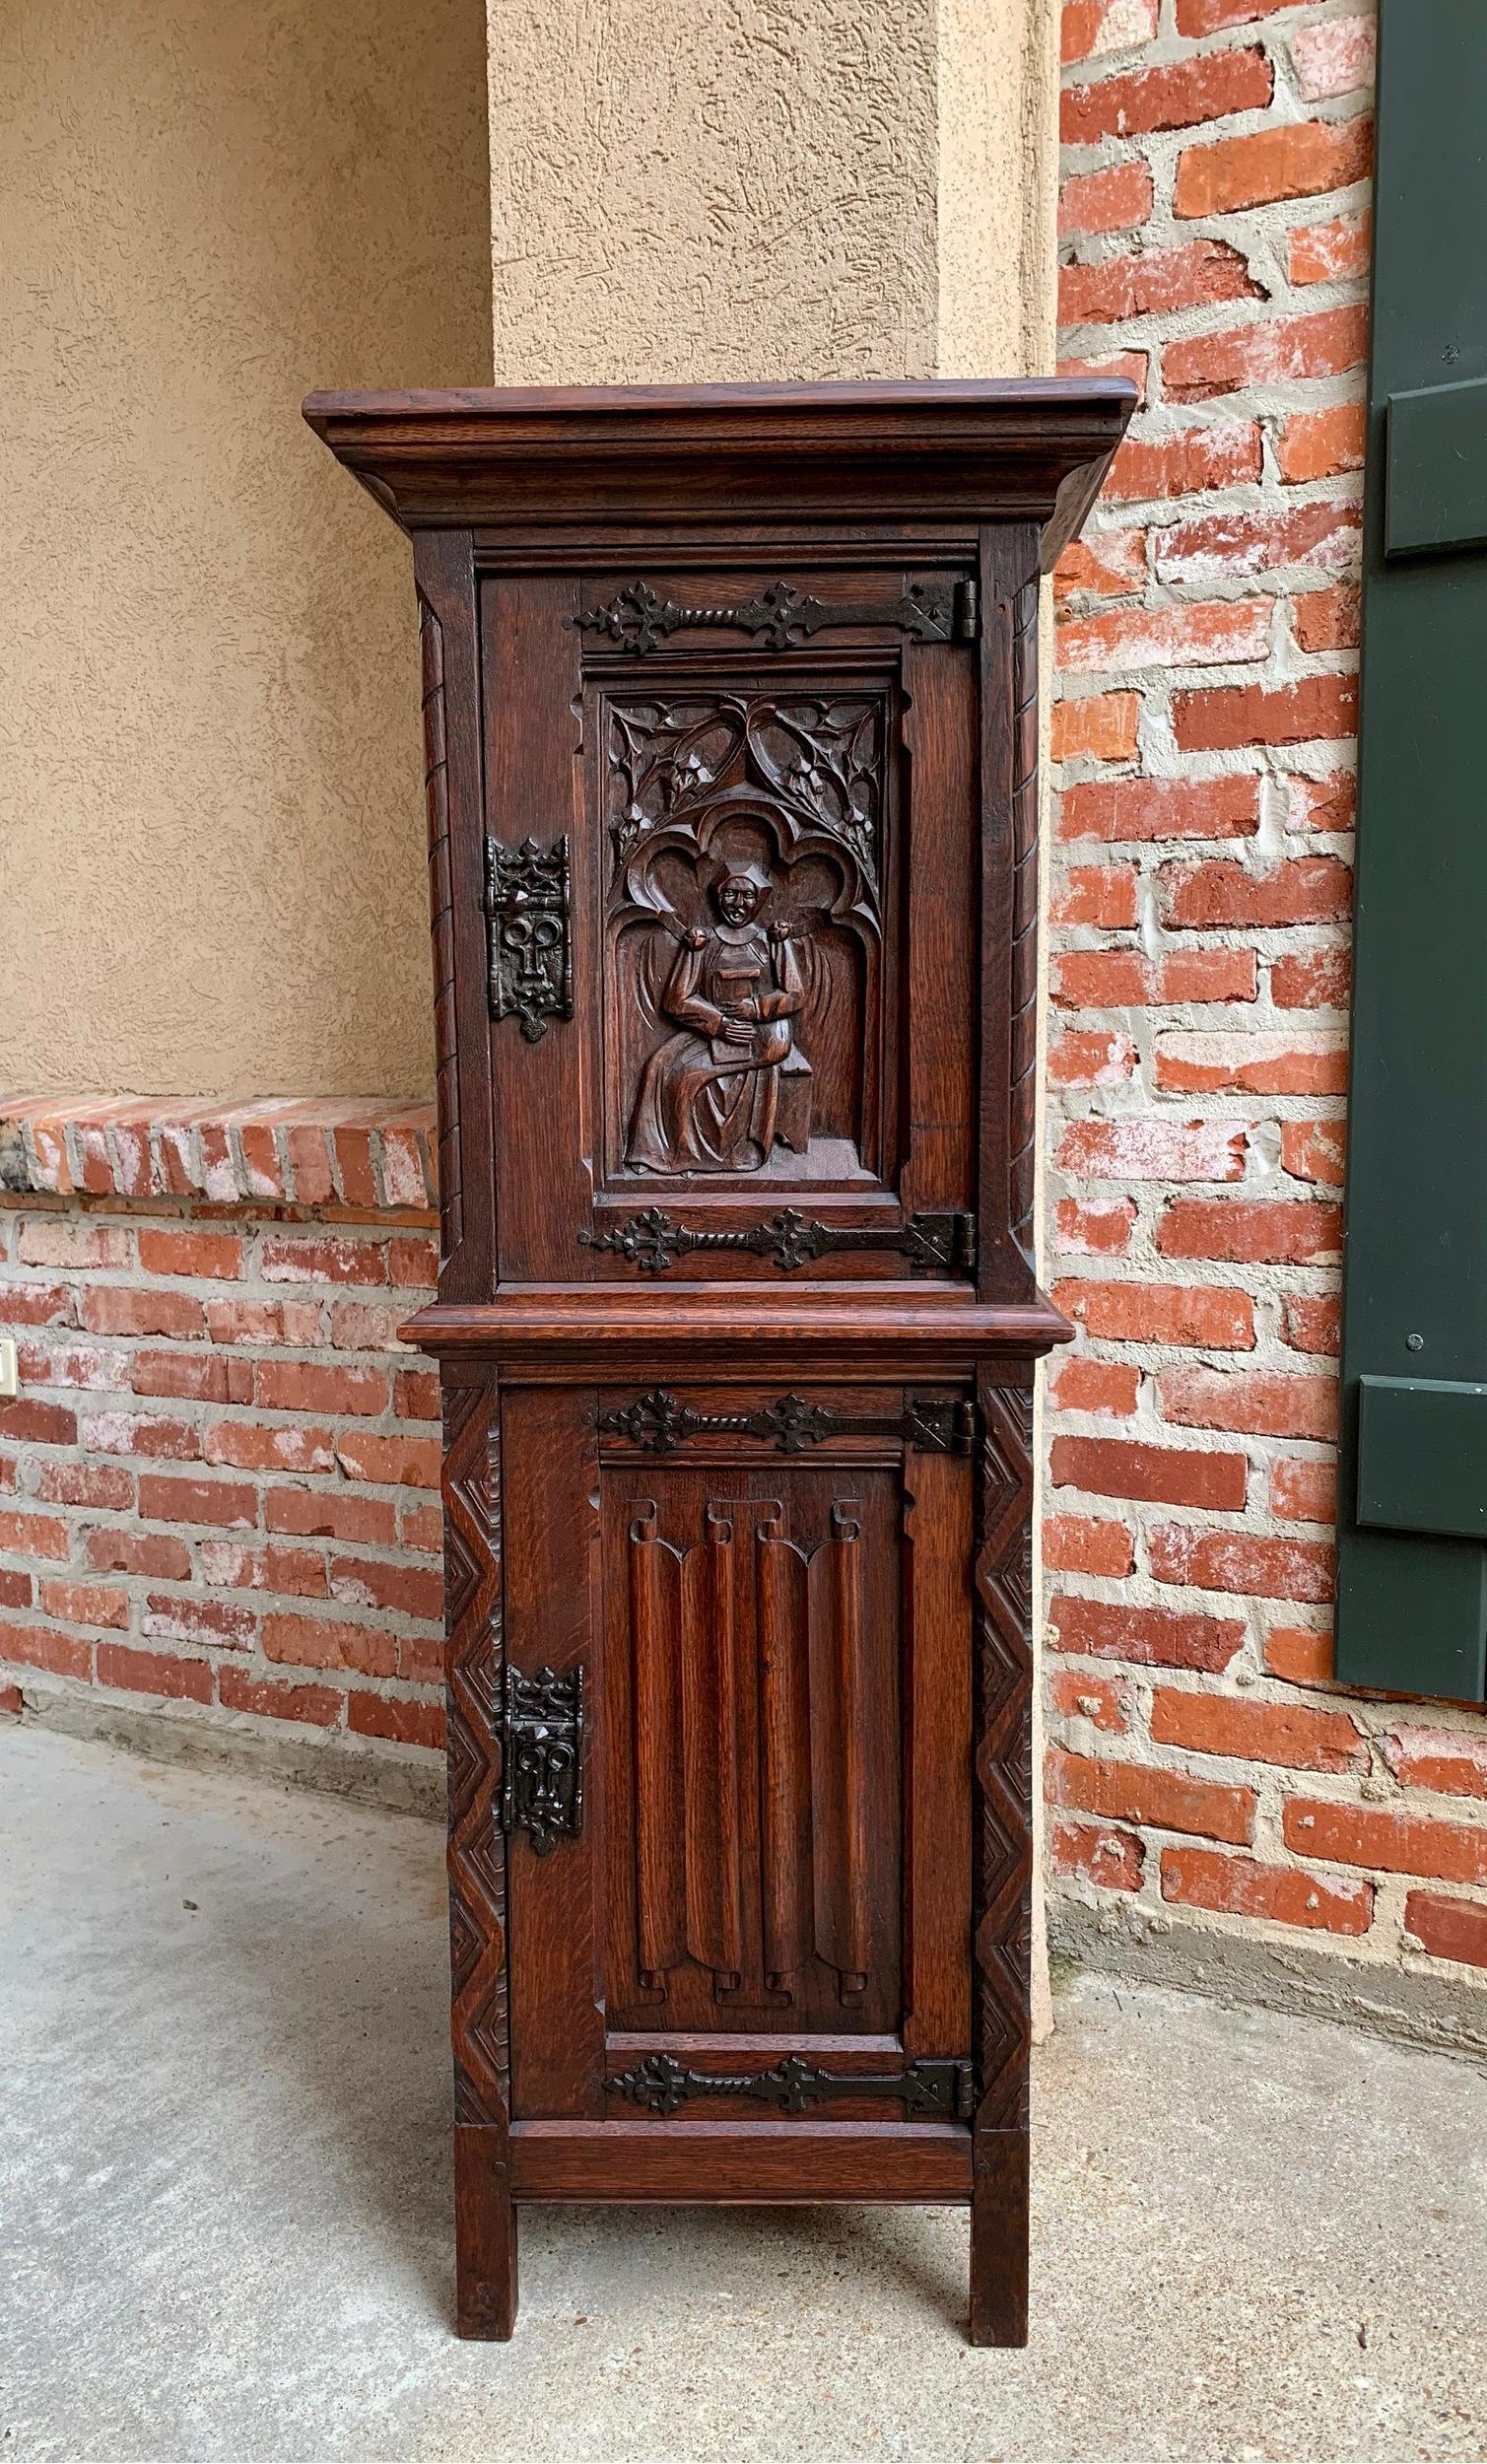 ~Direct from France~
~Super Petite antique French oak vestment/sacristy cabinet~
~Superb designs – look at the gorgeous dimensional carvings on the upper door panel…a sitting nun with Bible in hand, framed with carved gothic tracery~
~And